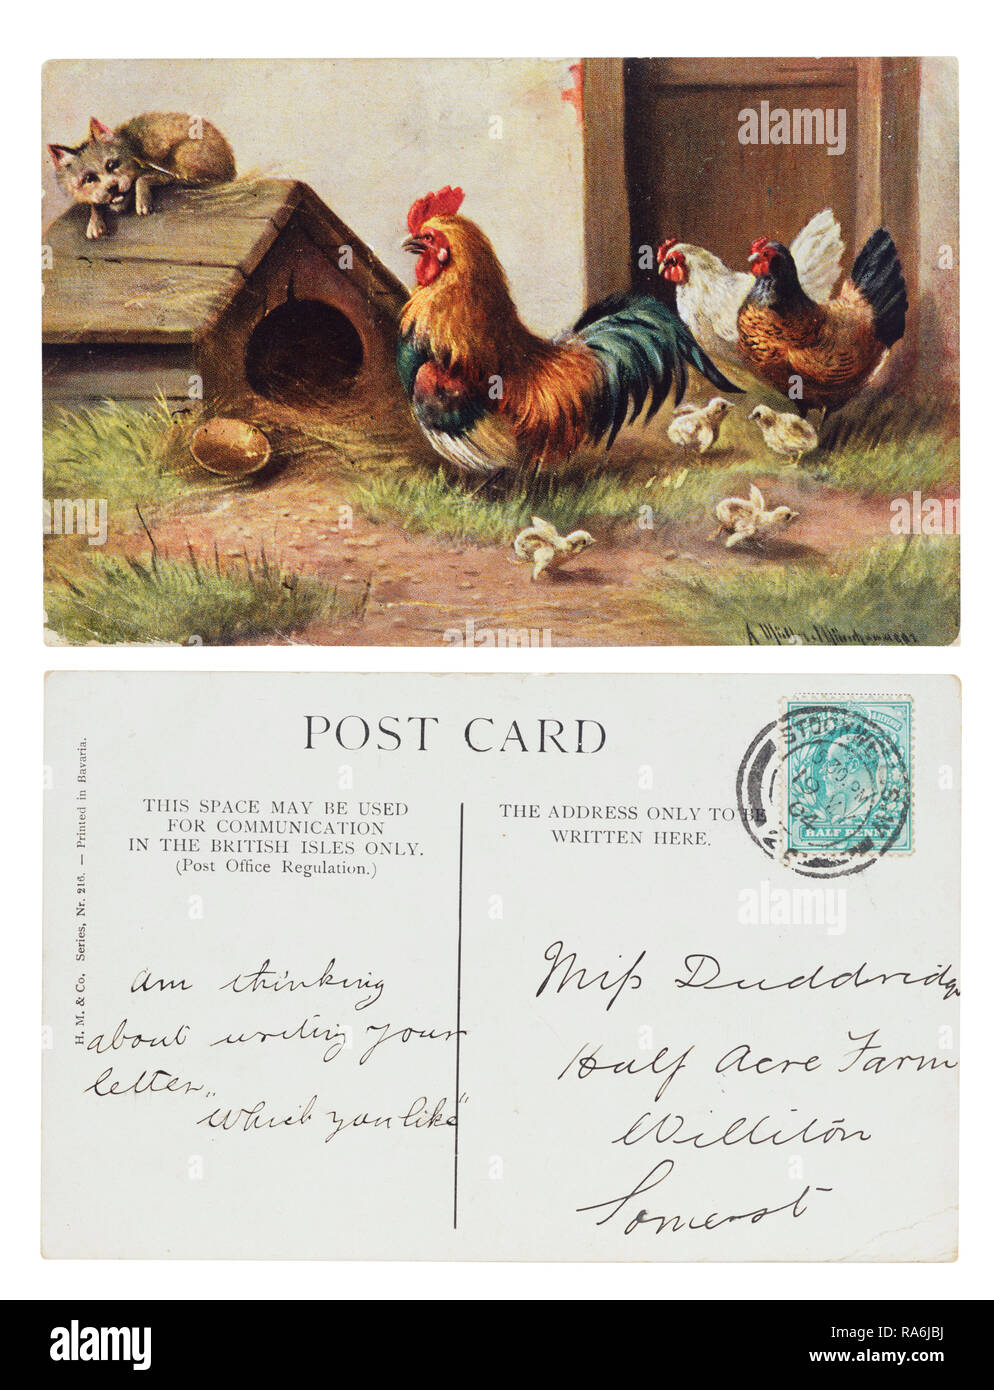 Postcard ‘am thinking about writing your letter, which you like’ Stock Photo